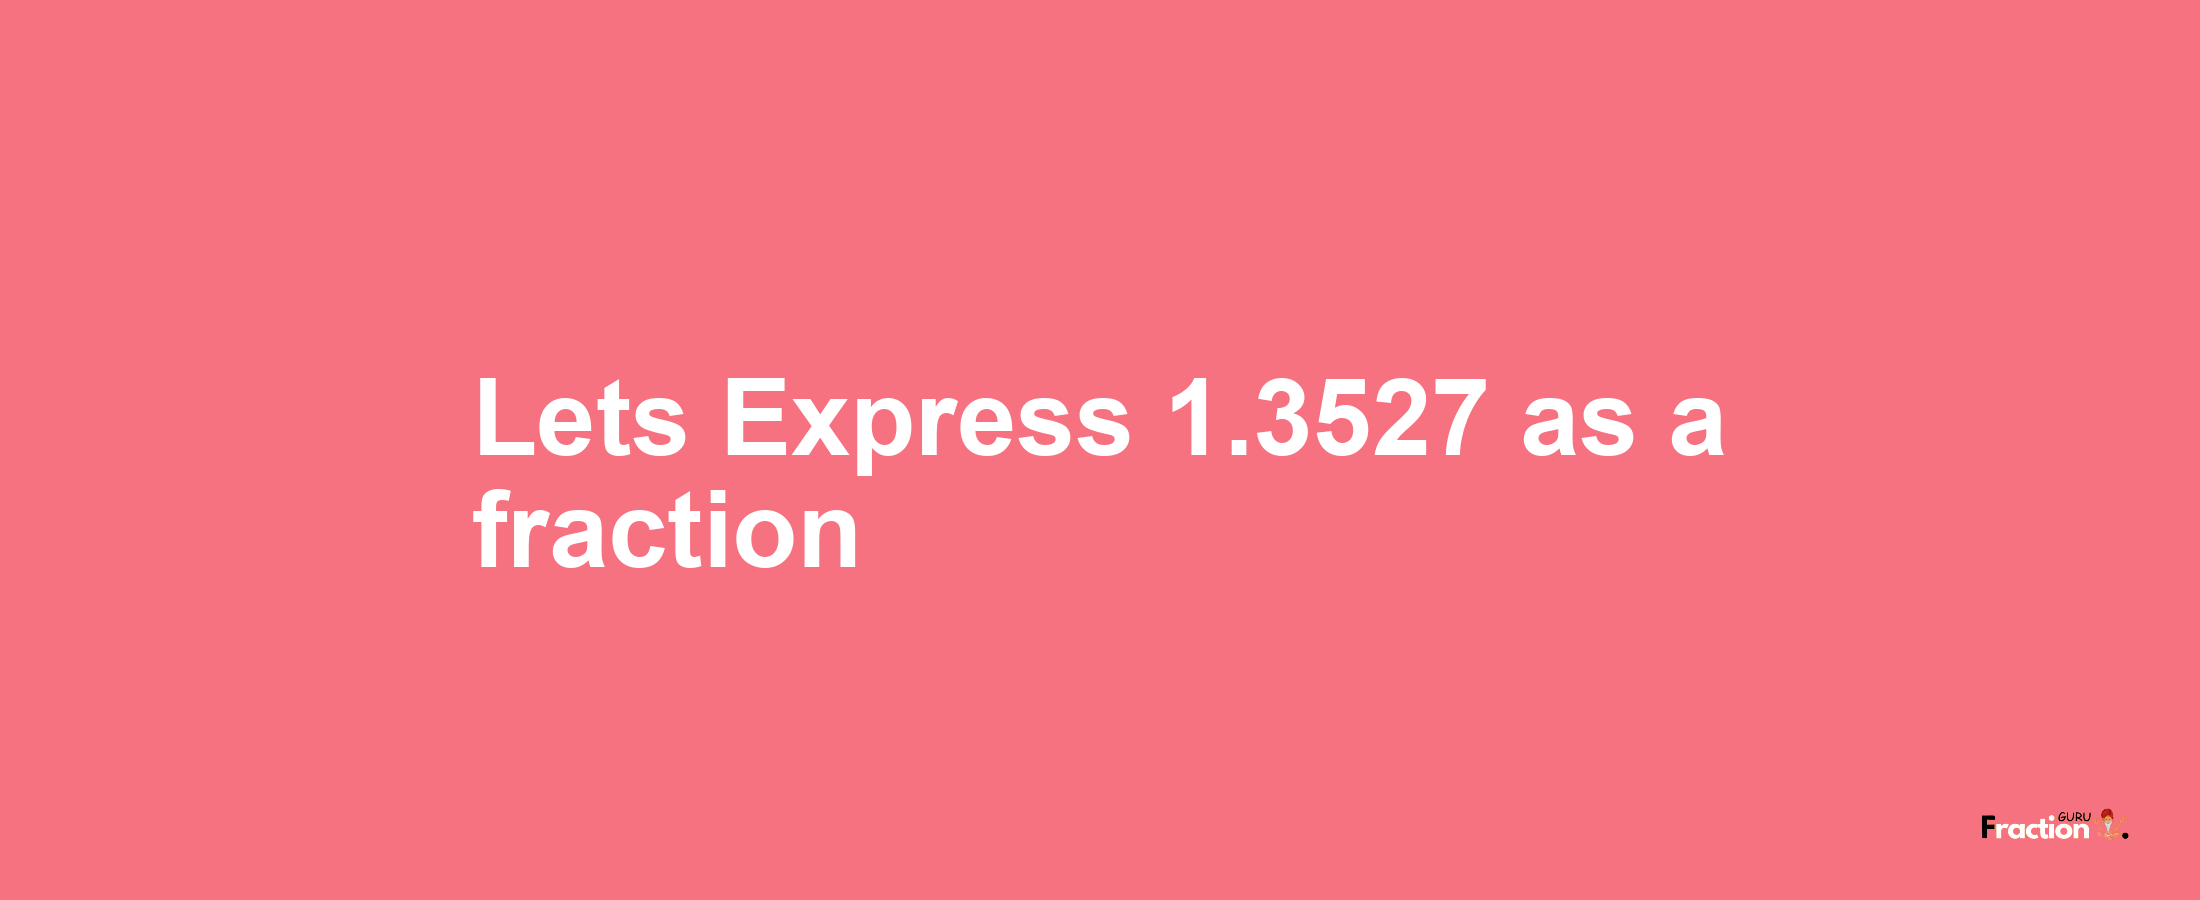 Lets Express 1.3527 as afraction